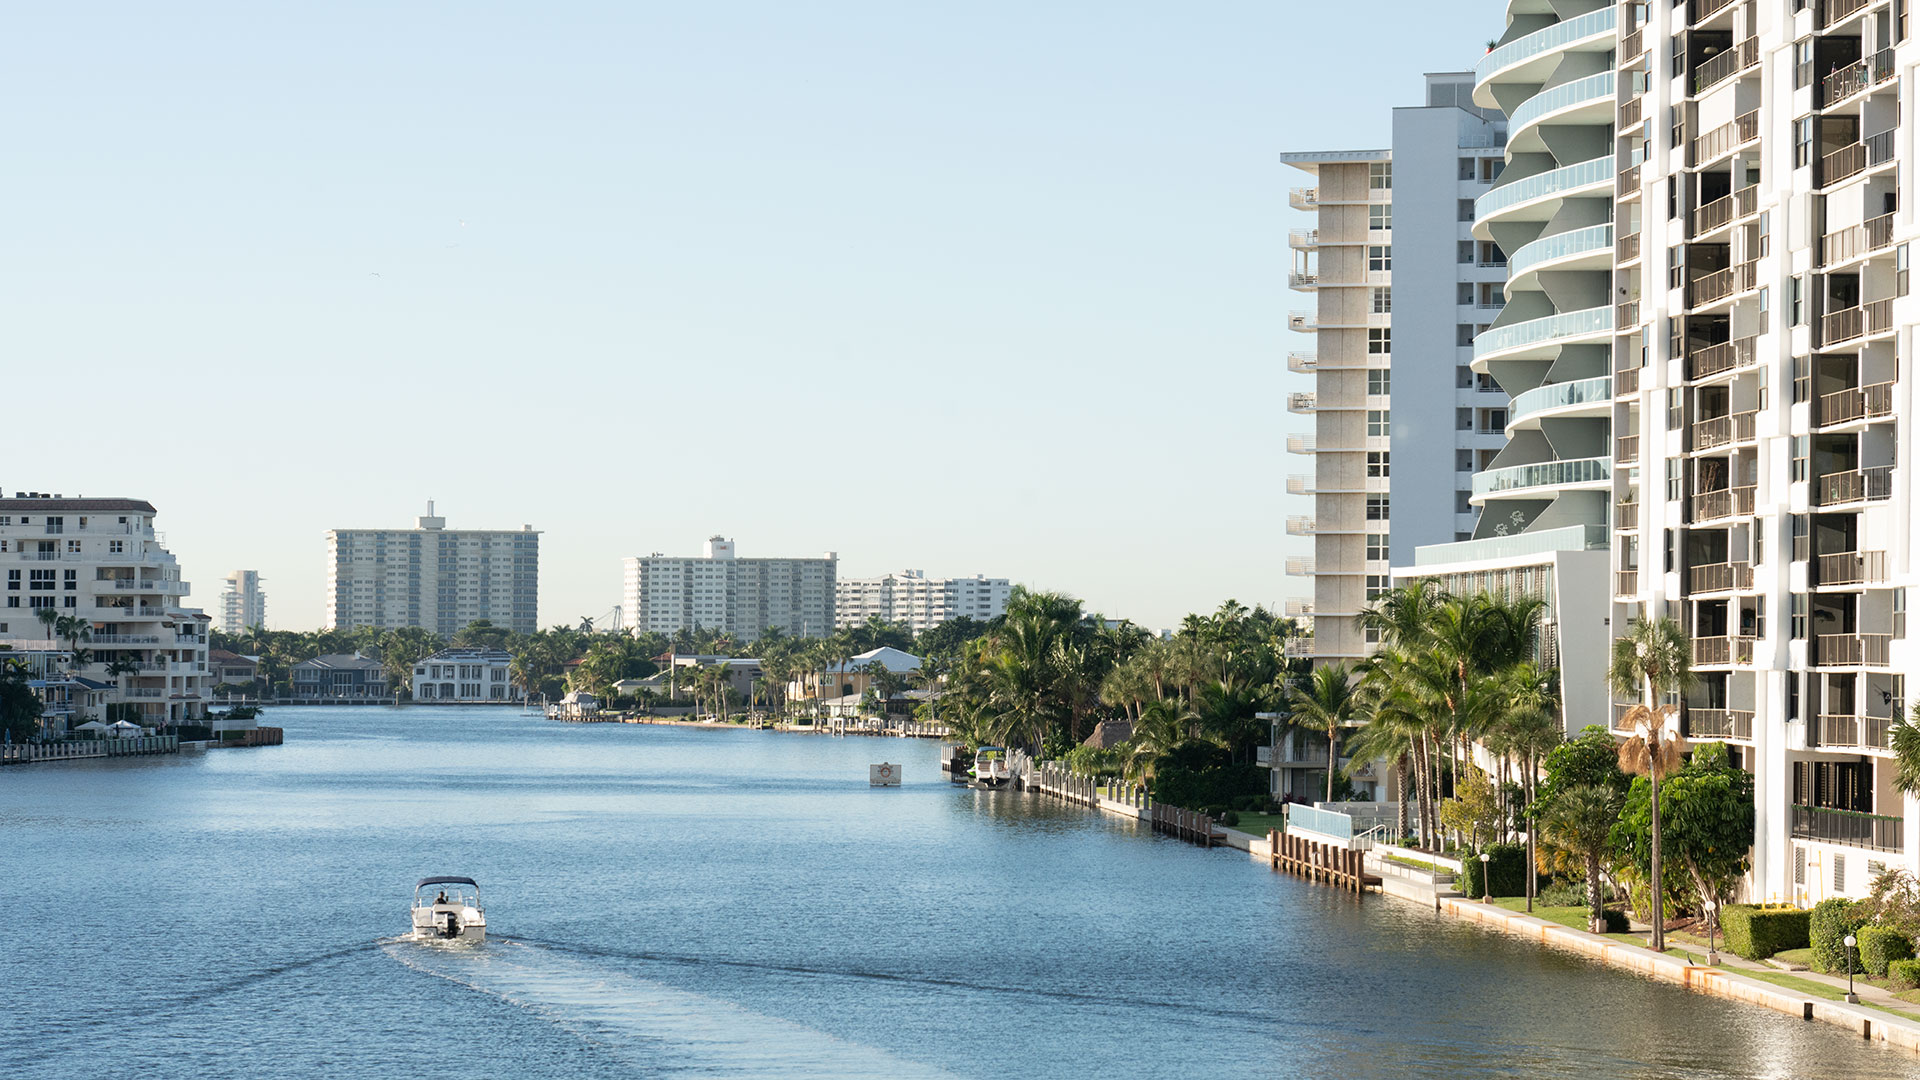 Canal and apartment buildings in Fort Lauderdale